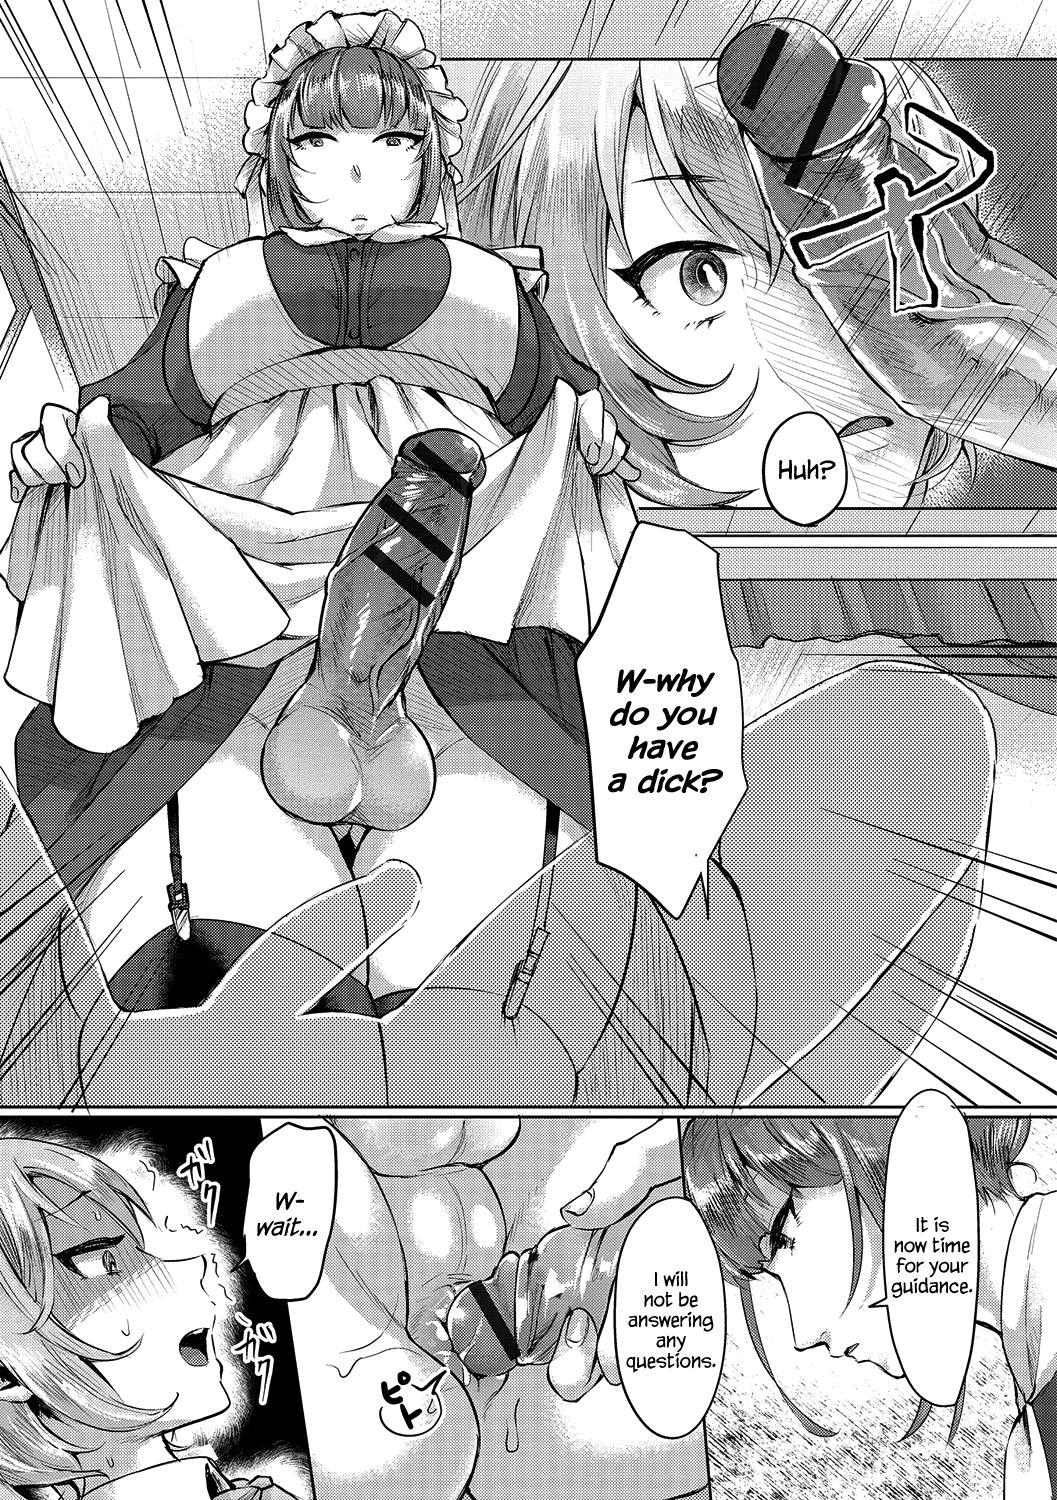 Bocchama no Aibou Maid | The Young Master’s Partner Maid 6